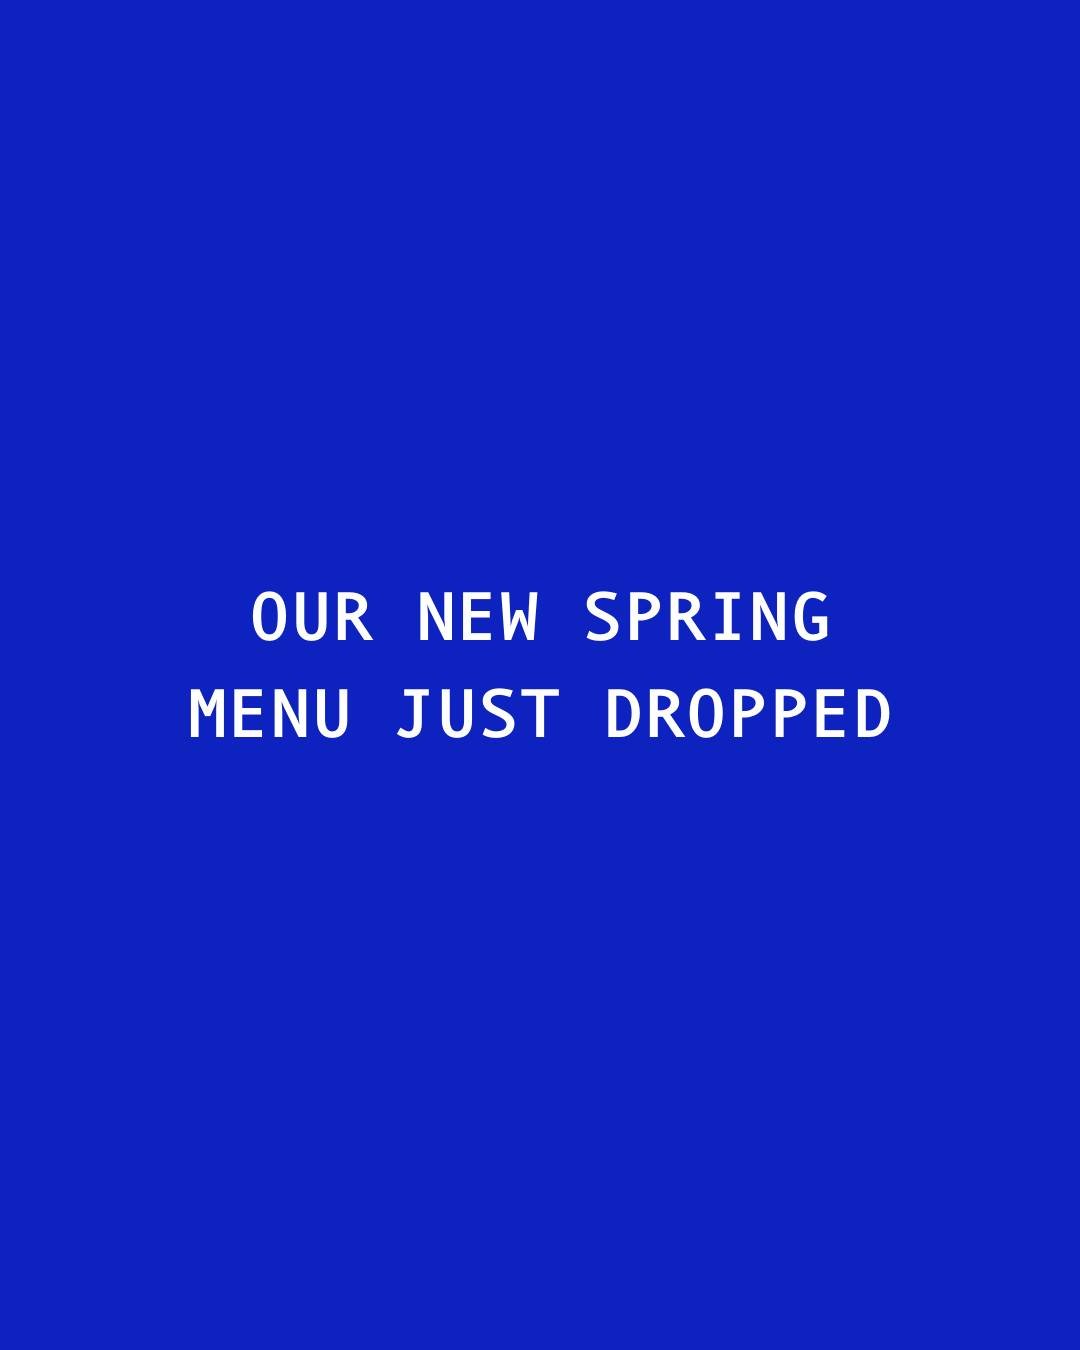 SPRING MENU JUST DROPPED 💥
We kept the best sellers and add 3 special grilled cheeses including a chorizo, a green veggie and an egg toast !

Please also welcome the cookies by Swookies  and viennoiseries 🥐

(Vegan ? Options available, ask the staf